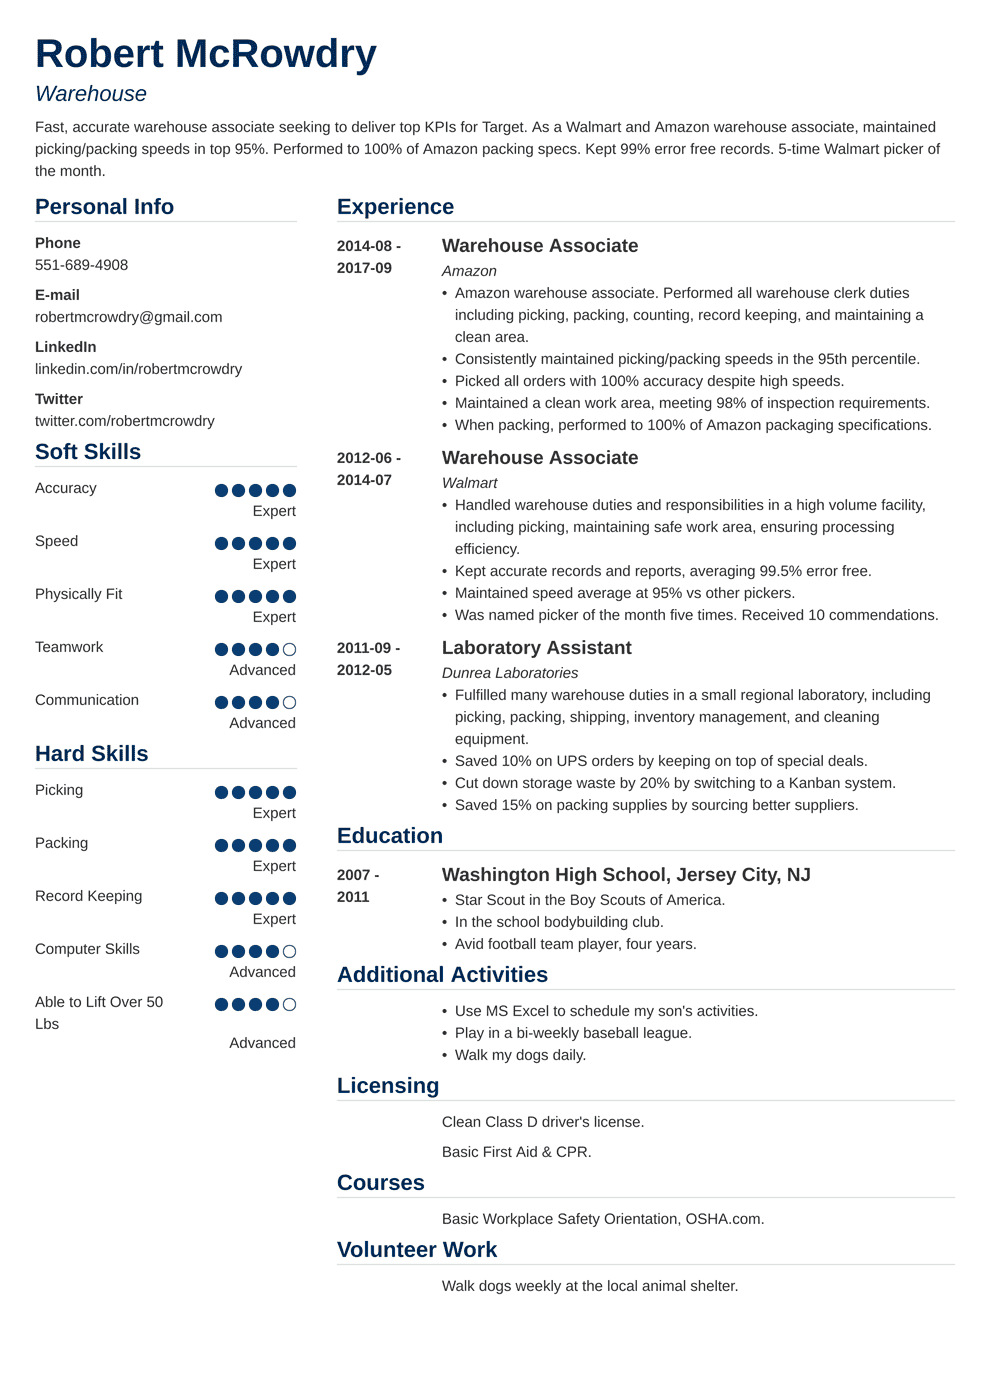 Warehouse Worker Resume Examples (+ Skills & More)